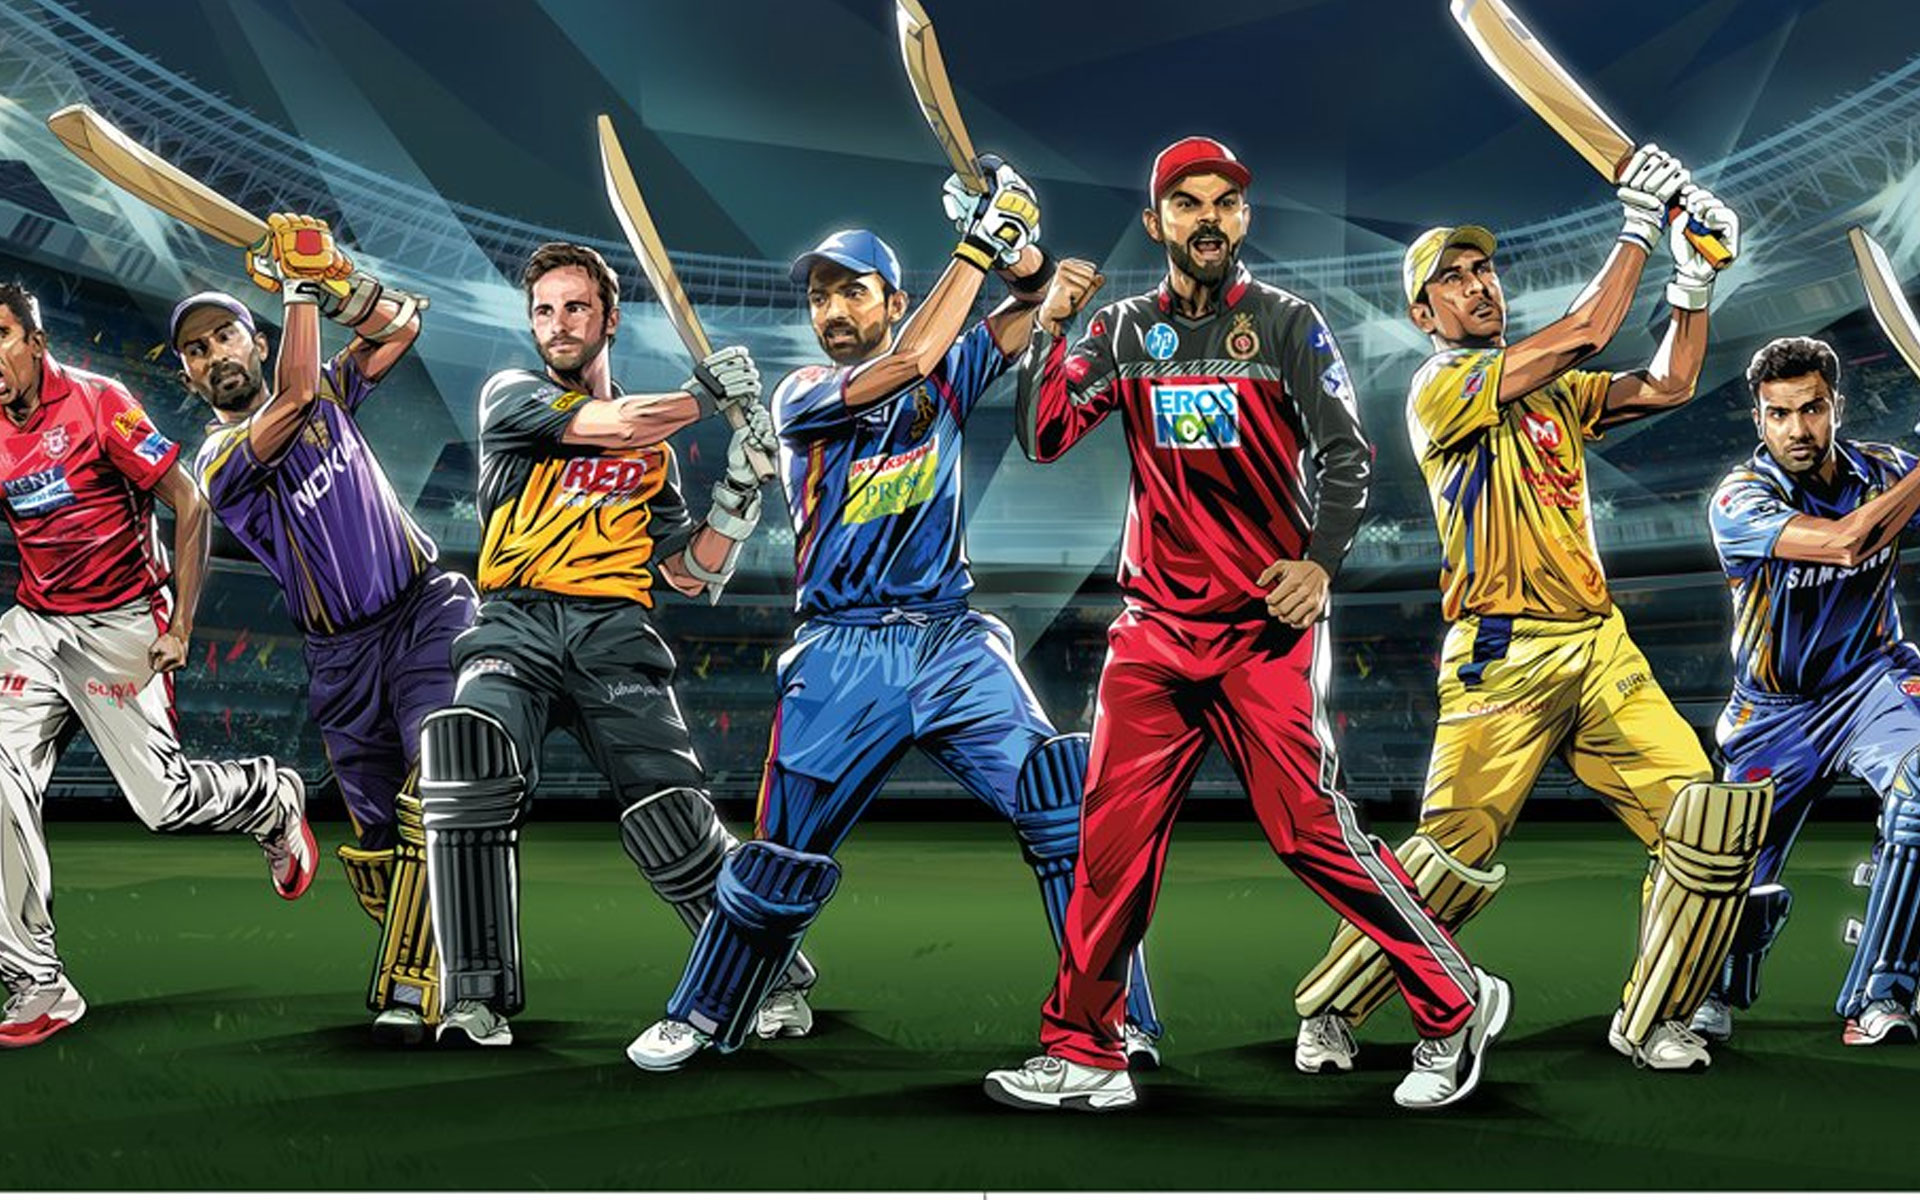 IPL 2020 to have 15 players instead